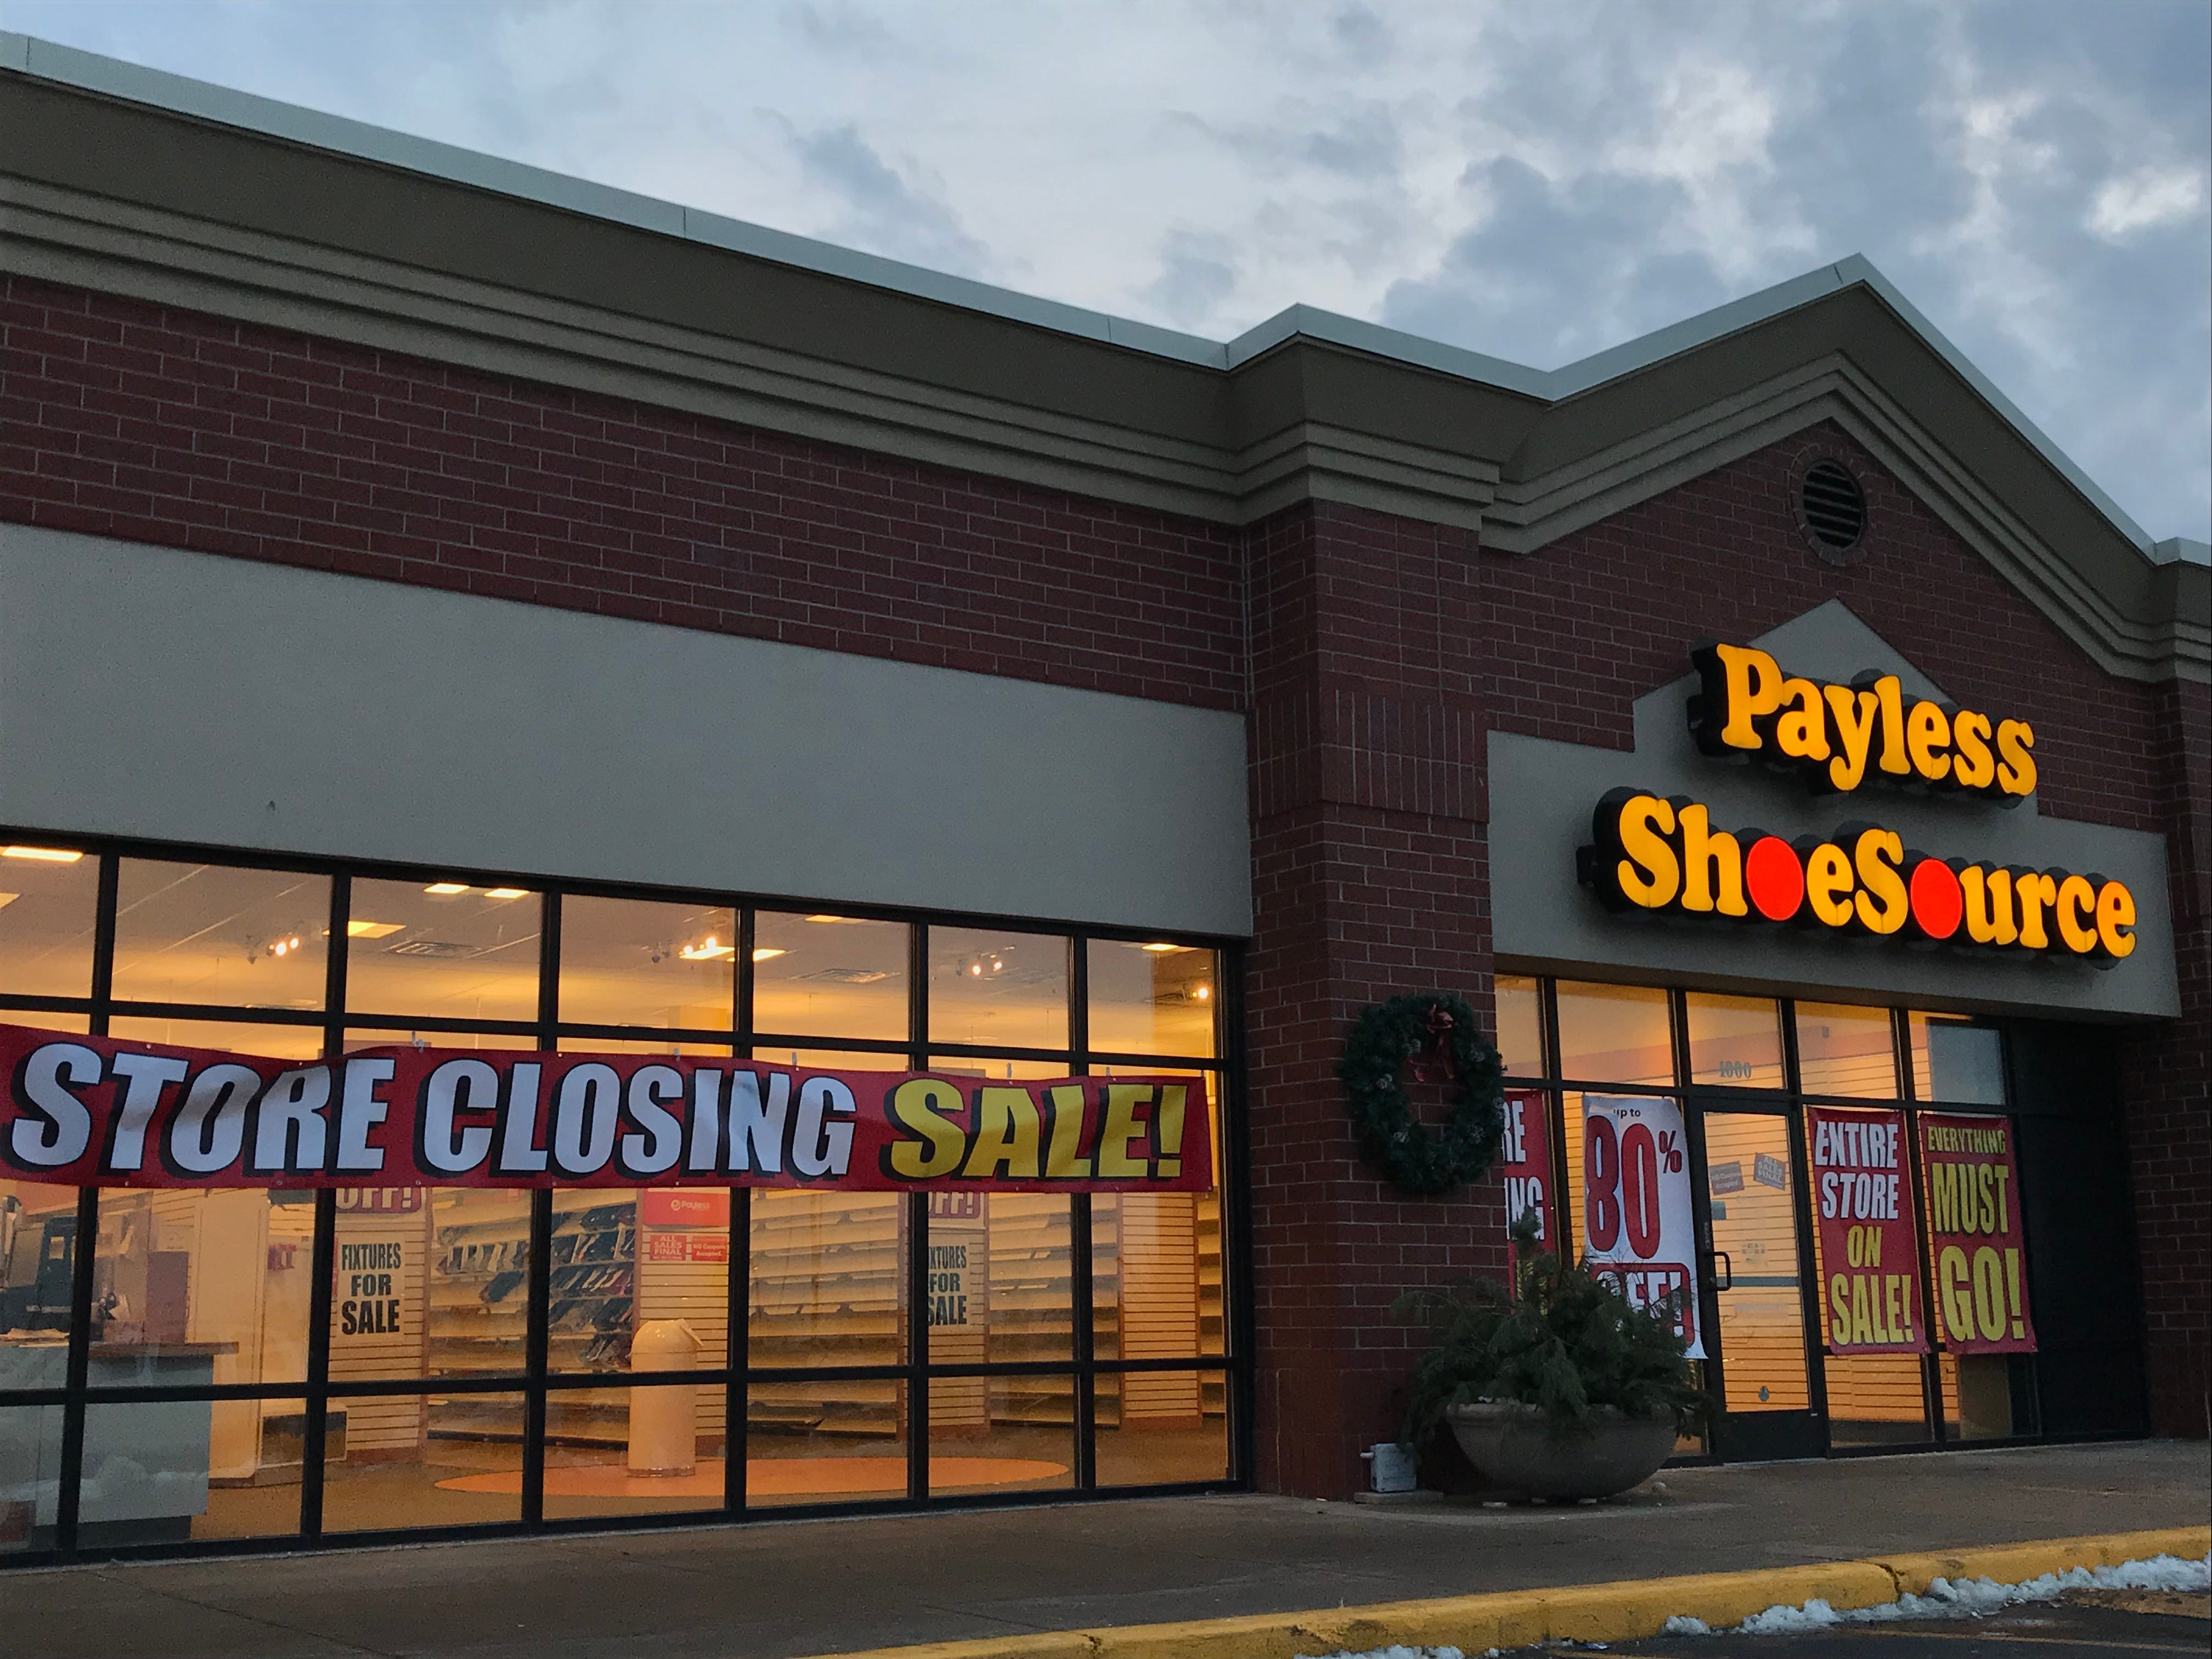 Payless ShoeSource stores closing 